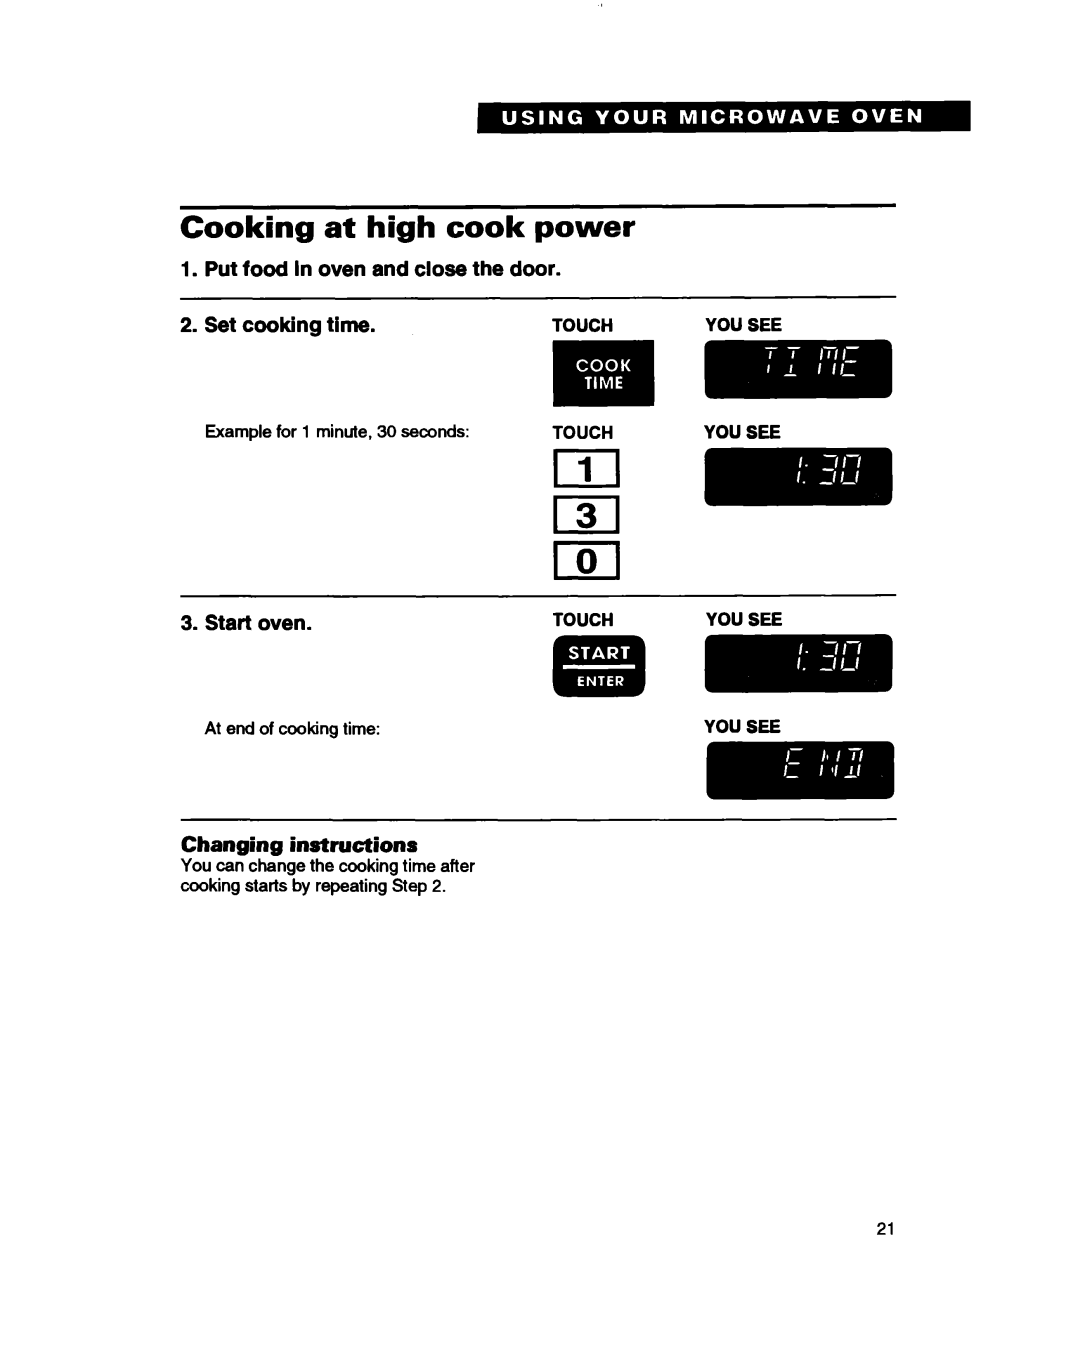 Whirlpool MH7115XB warranty Cooking at high cook power, Put food In oven and close the door, Set cooking time, Start oven 